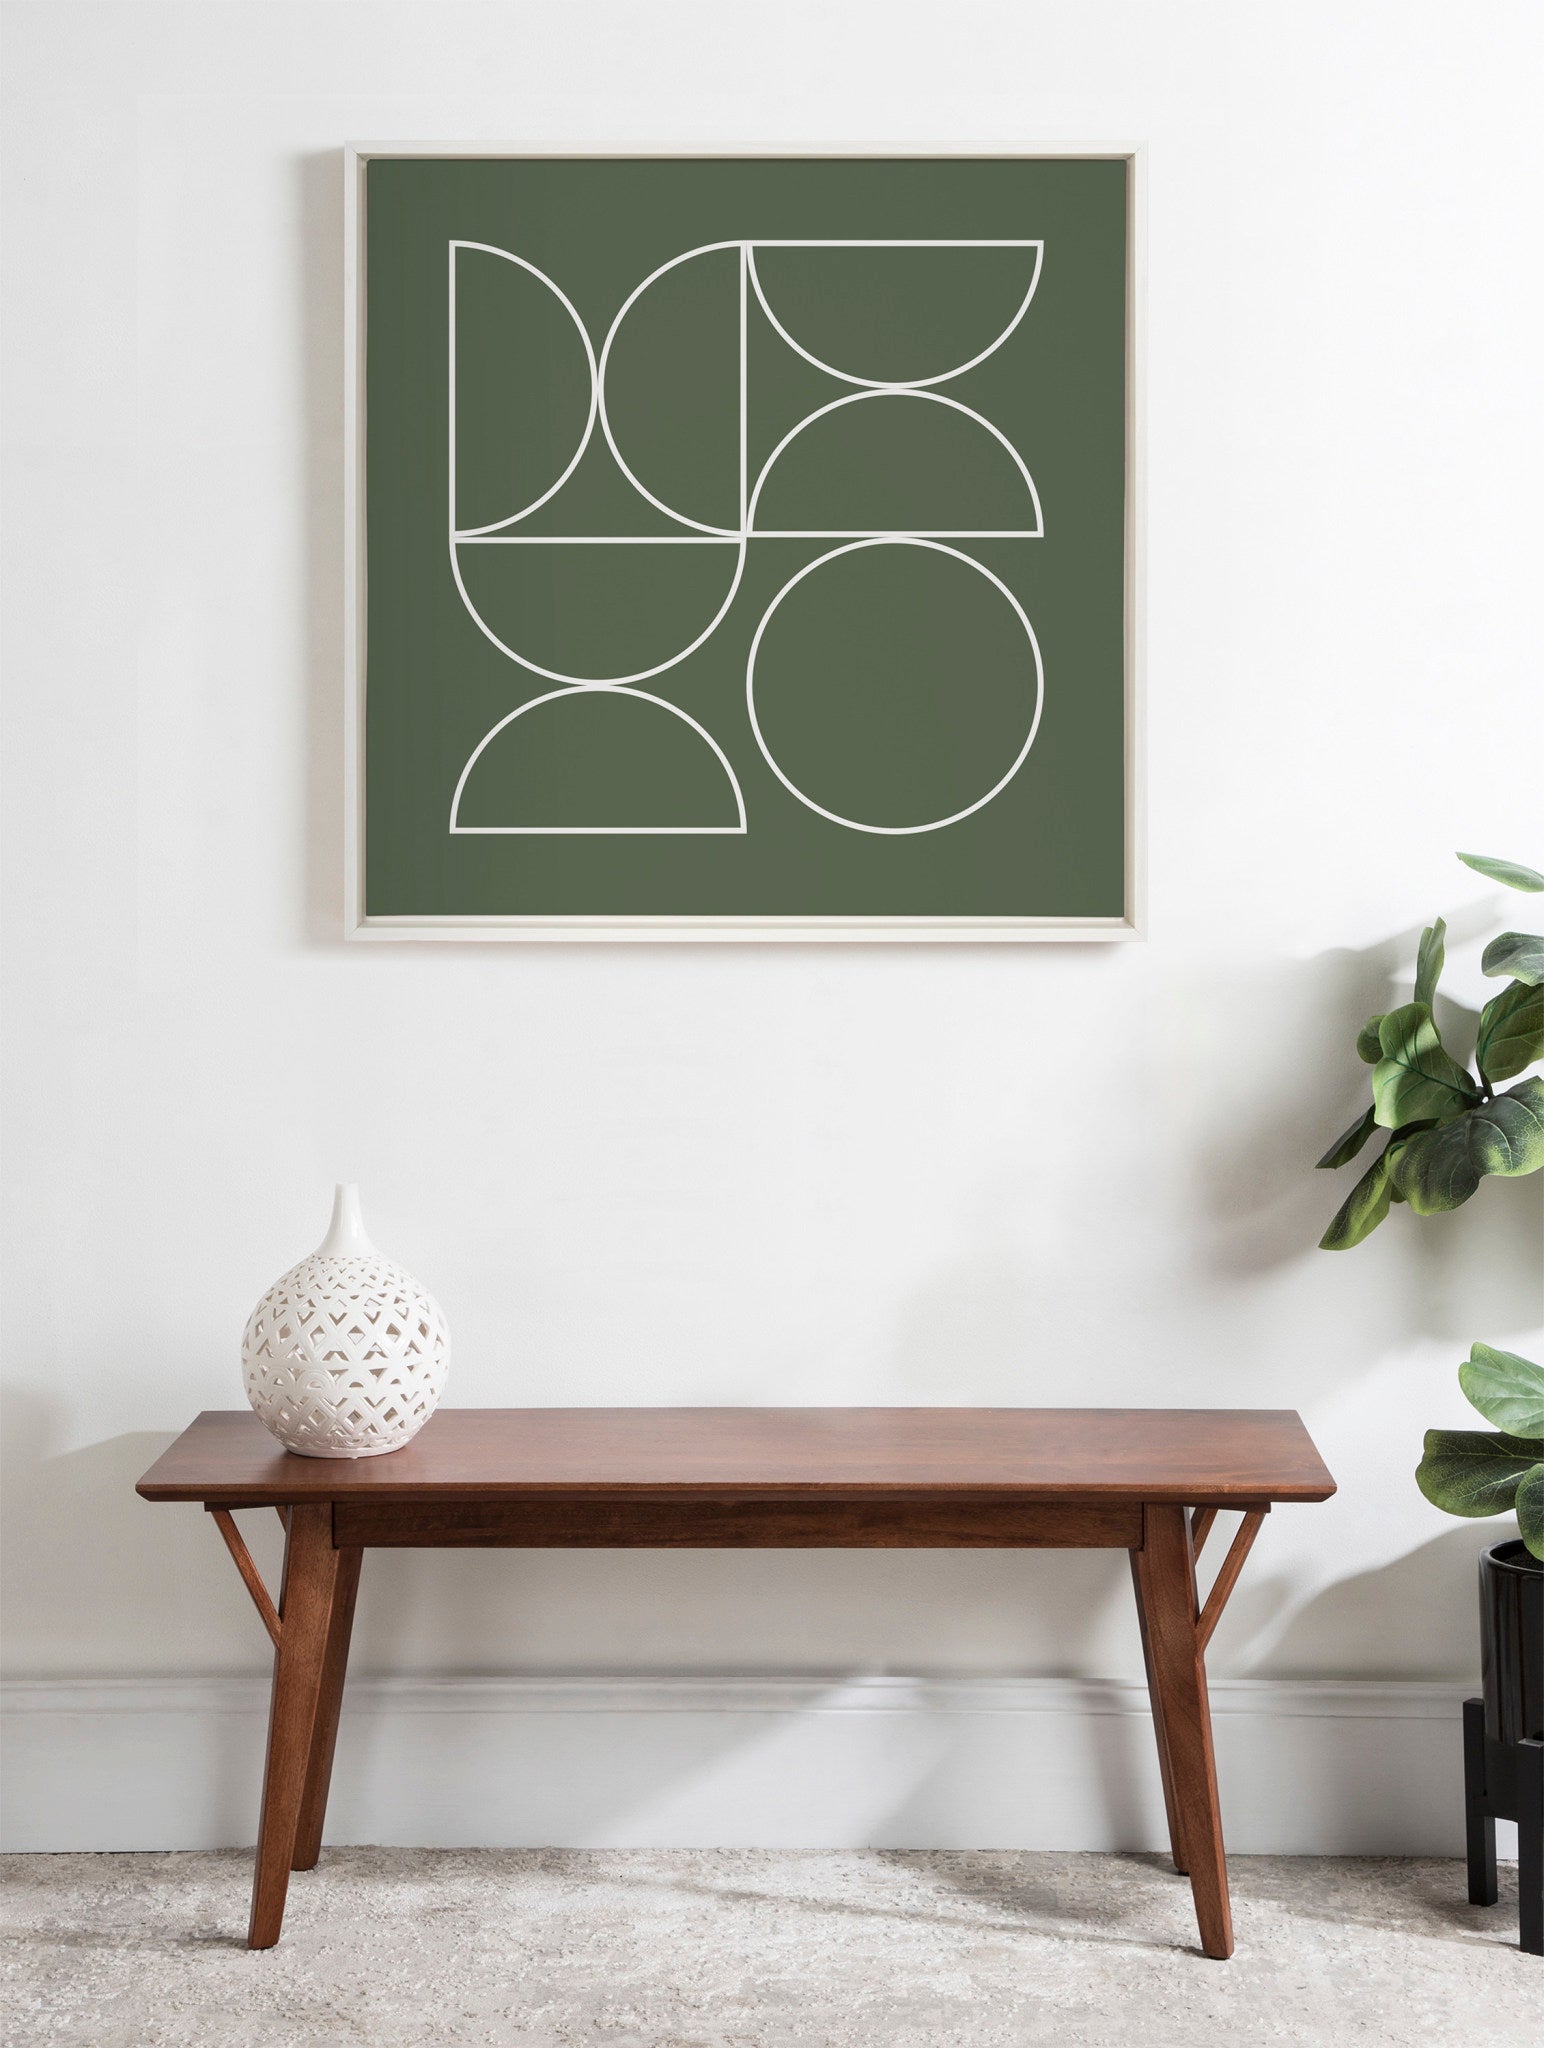 Sylvie Bold Vintage Geometric Line Art Olive Green Framed Canvas by The Creative Bunch Studio